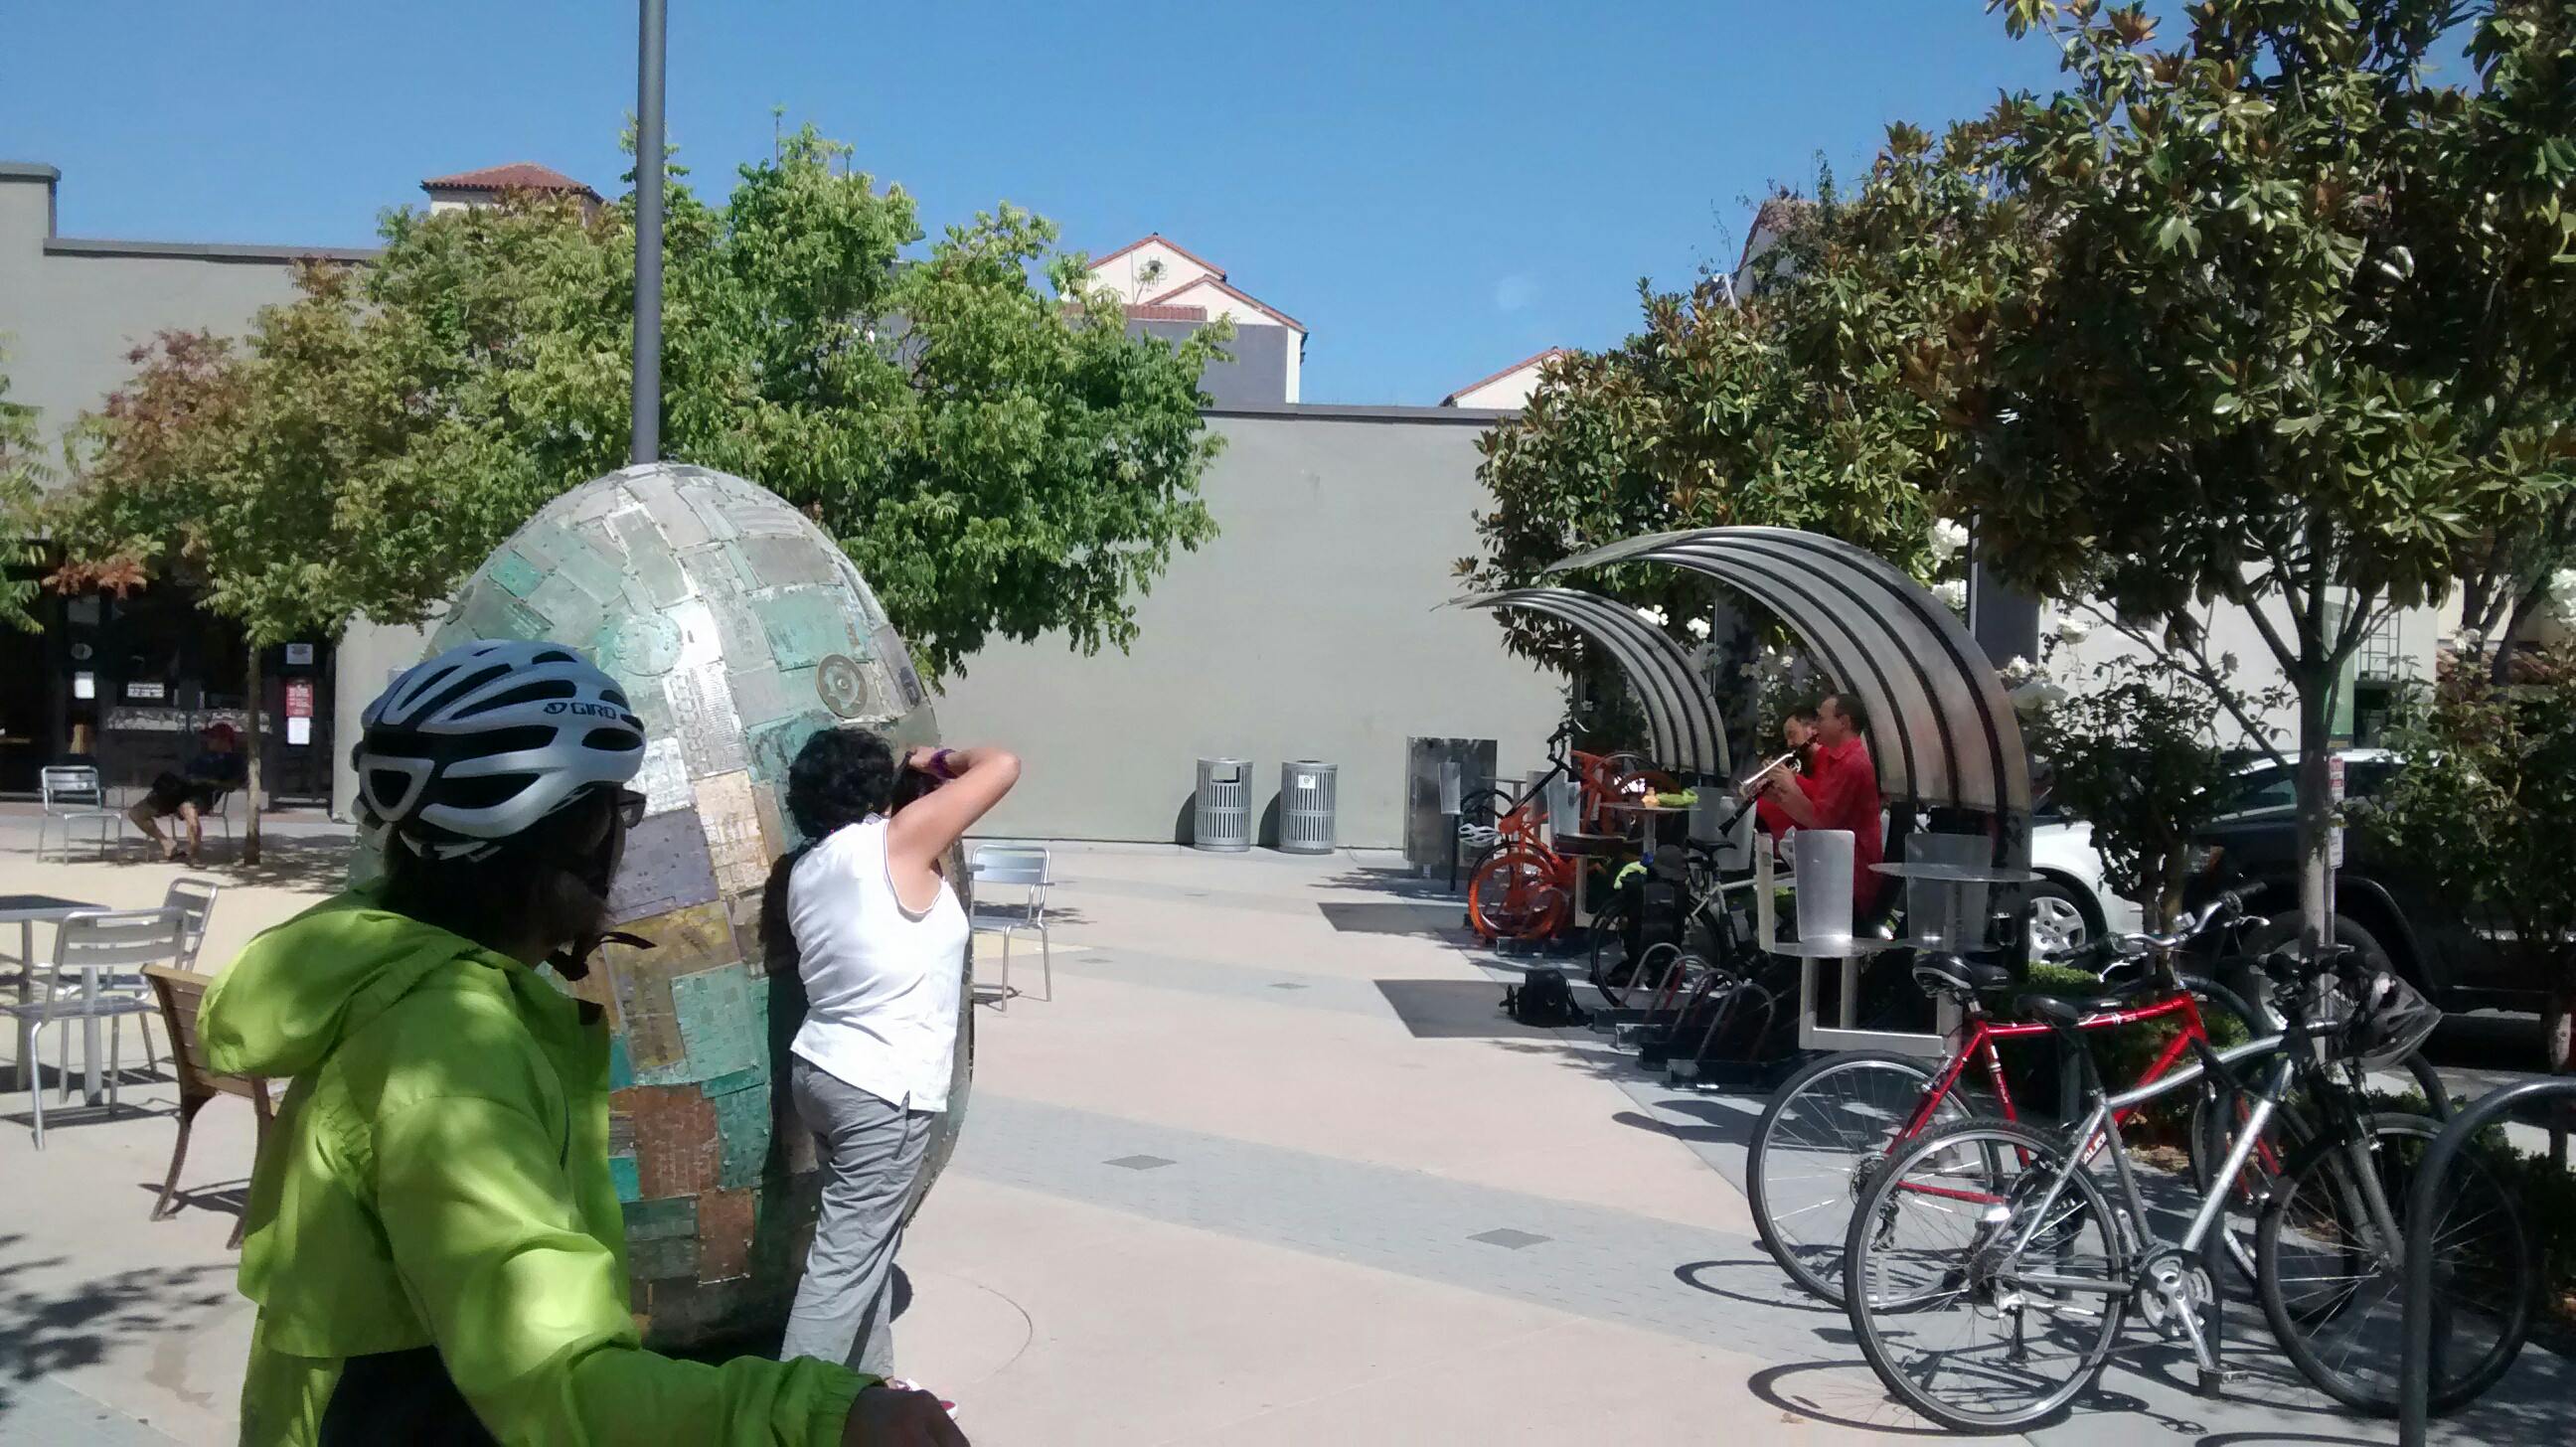 event 9/20/14 Lytton DESIGNED site specific by mark weiss for earthwise of paloalto